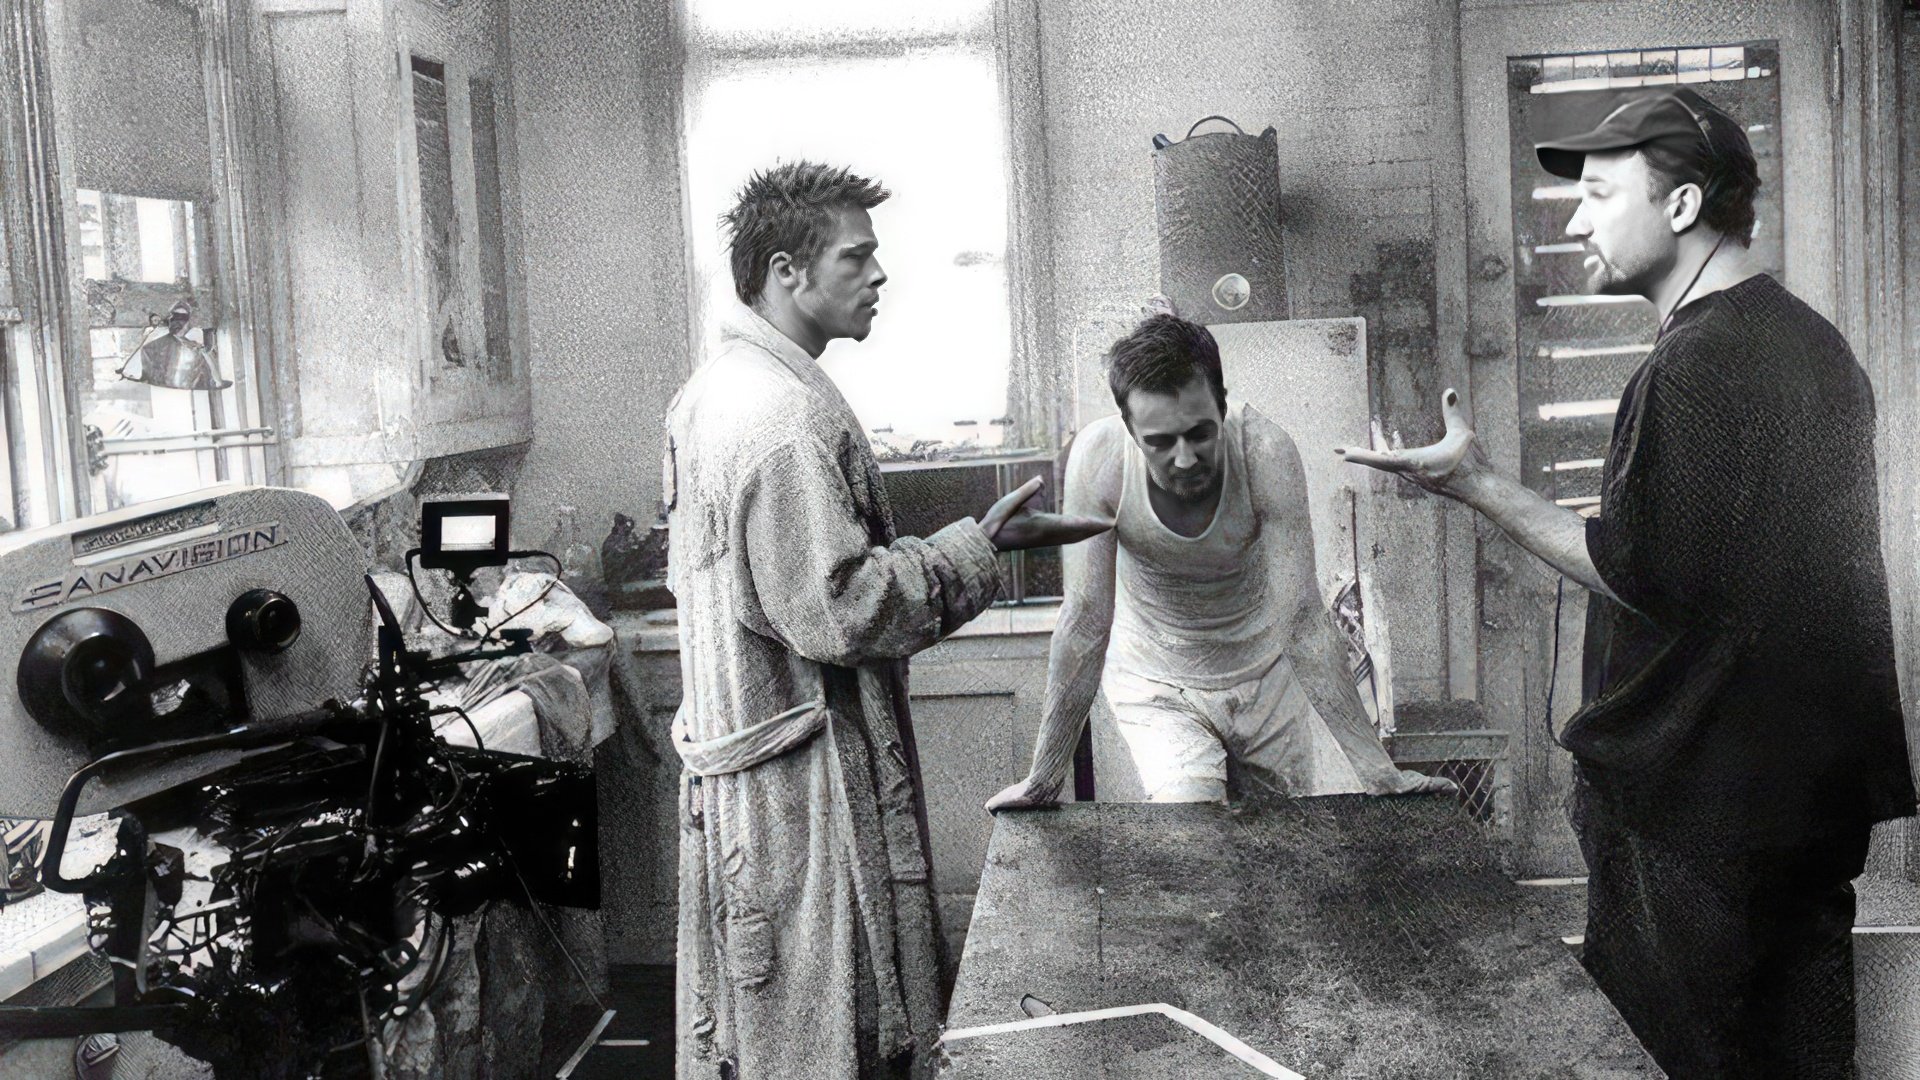 On the set of “Fight Club”